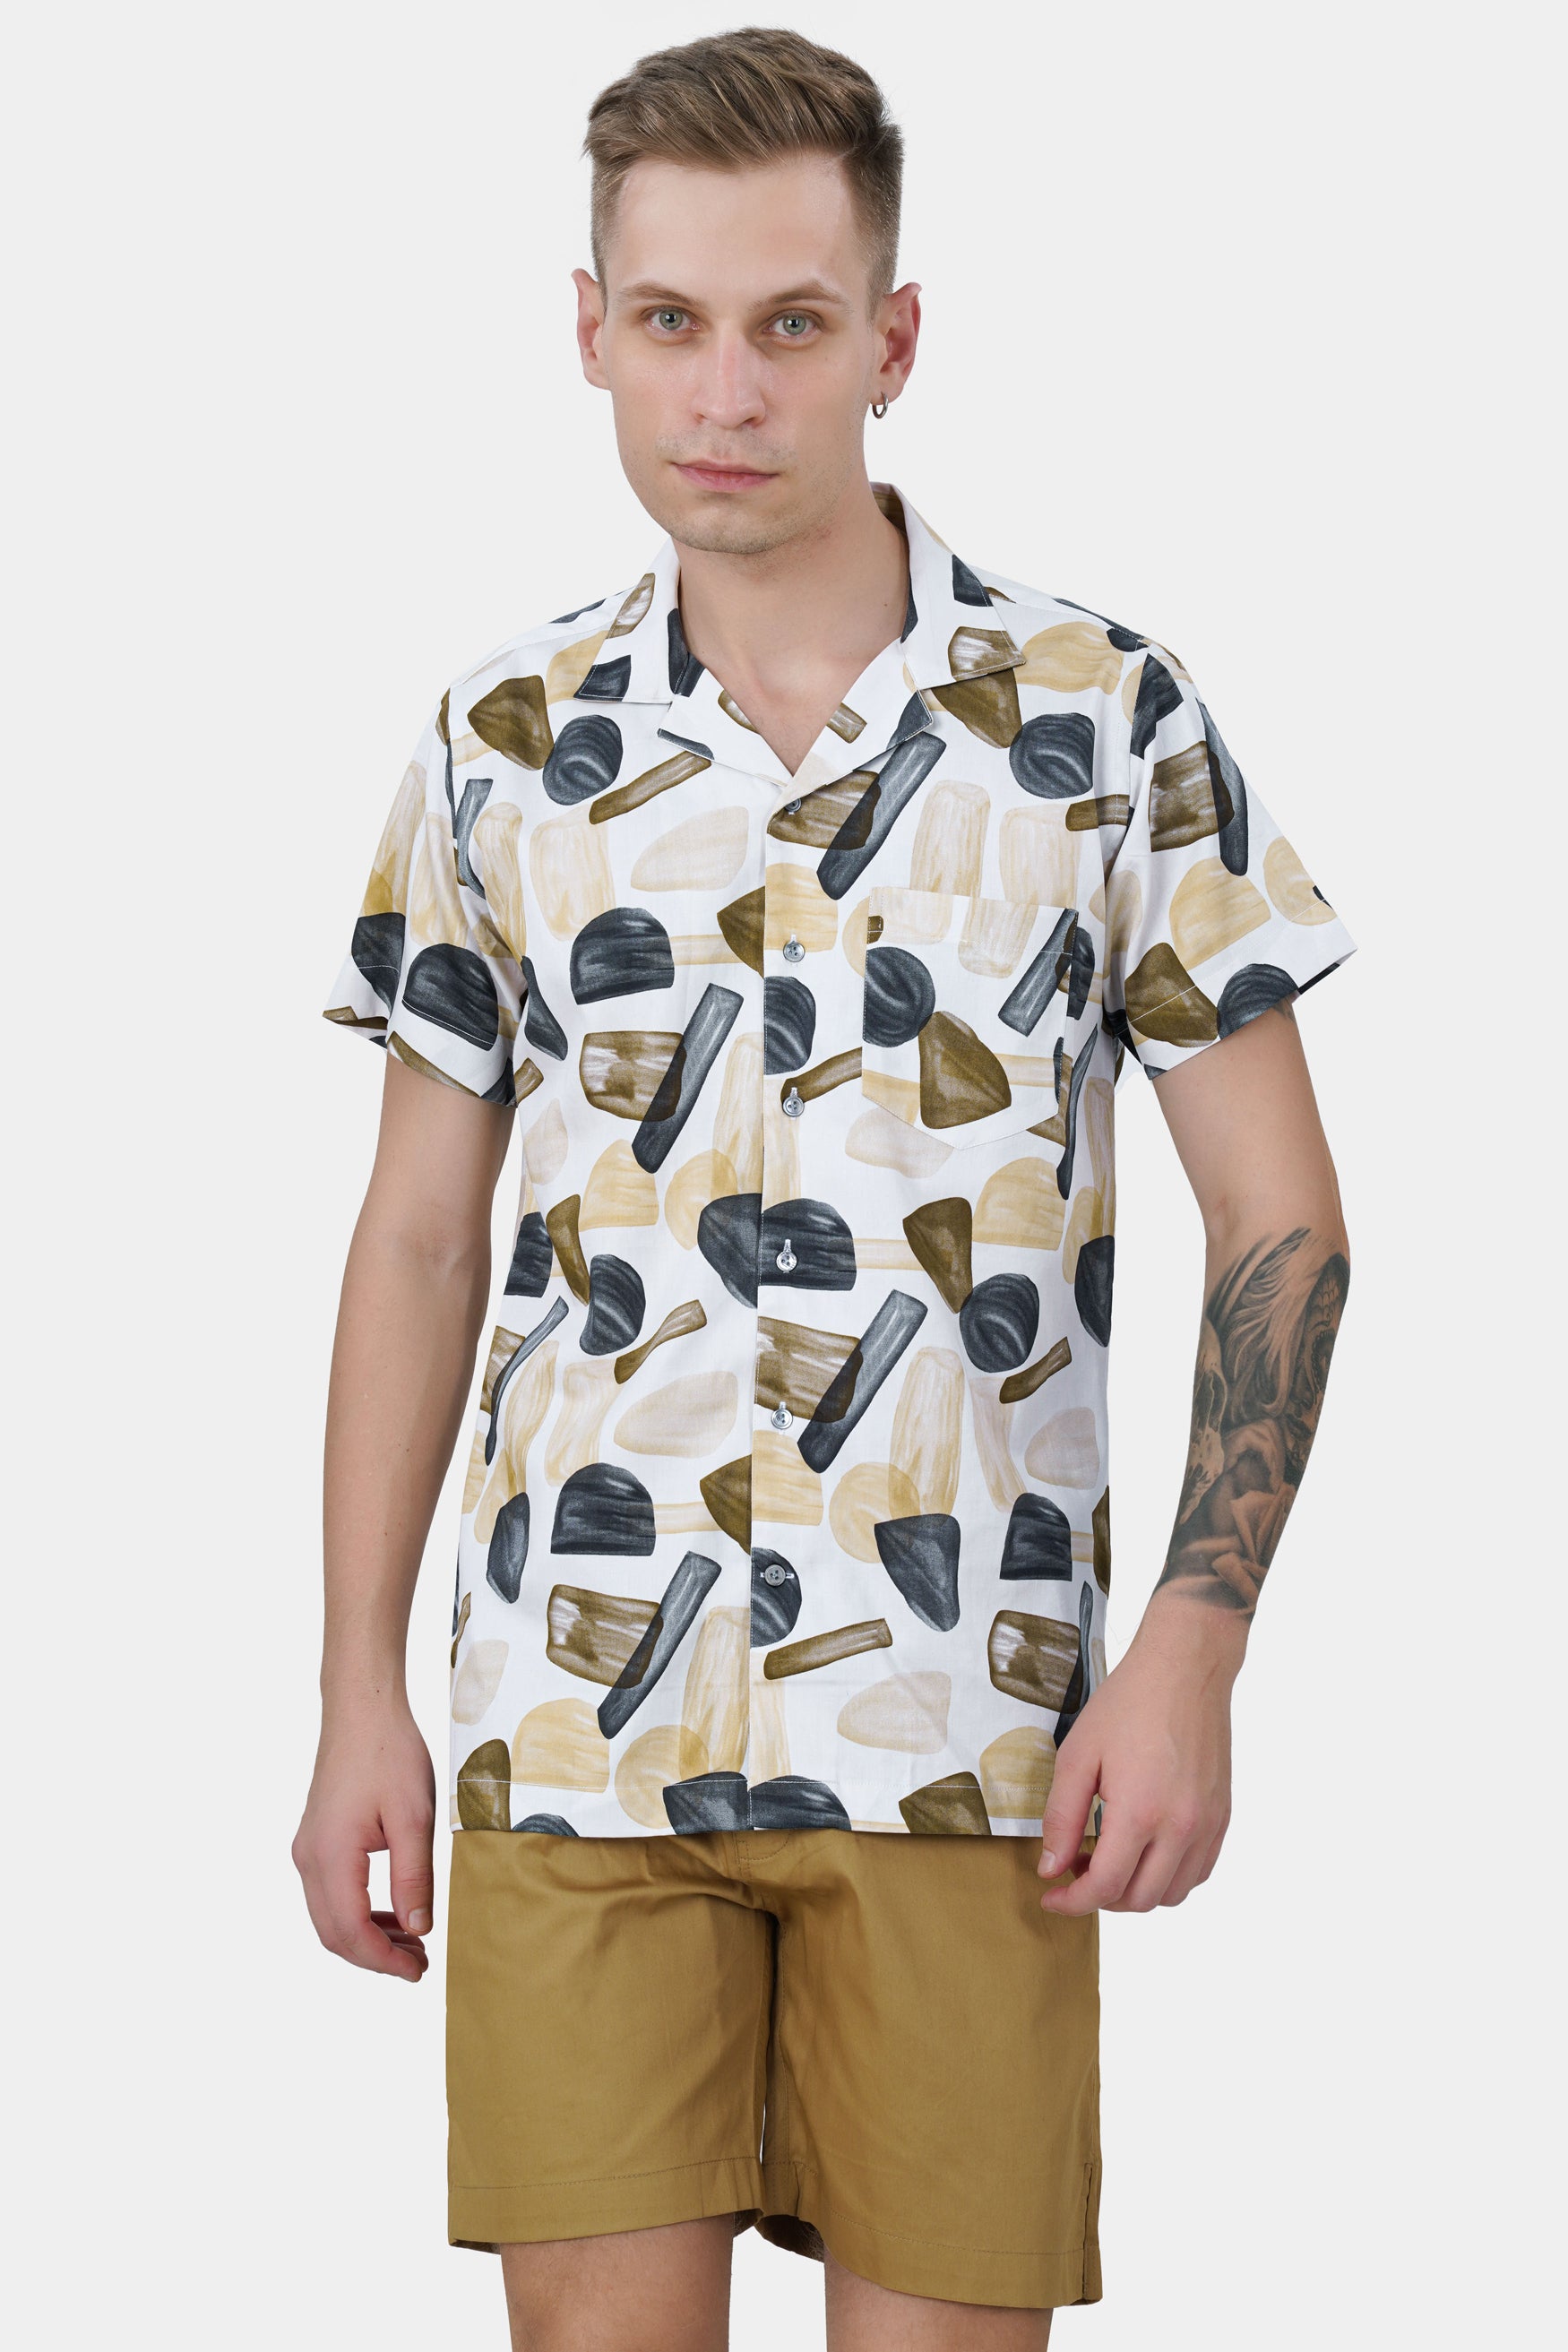 Bright White and Umber Brown Abstract Printed Subtle Sheen Super Soft Premium Cotton Shirt 11716-CC-SS-GREY-38, 11716-CC-SS-GREY-39, 11716-CC-SS-GREY-40, 11716-CC-SS-GREY-42, 11716-CC-SS-GREY-44, 11716-CC-SS-GREY-46, 11716-CC-SS-GREY-48, 11716-CC-SS-GREY-50, 11716-CC-SS-GREY-52